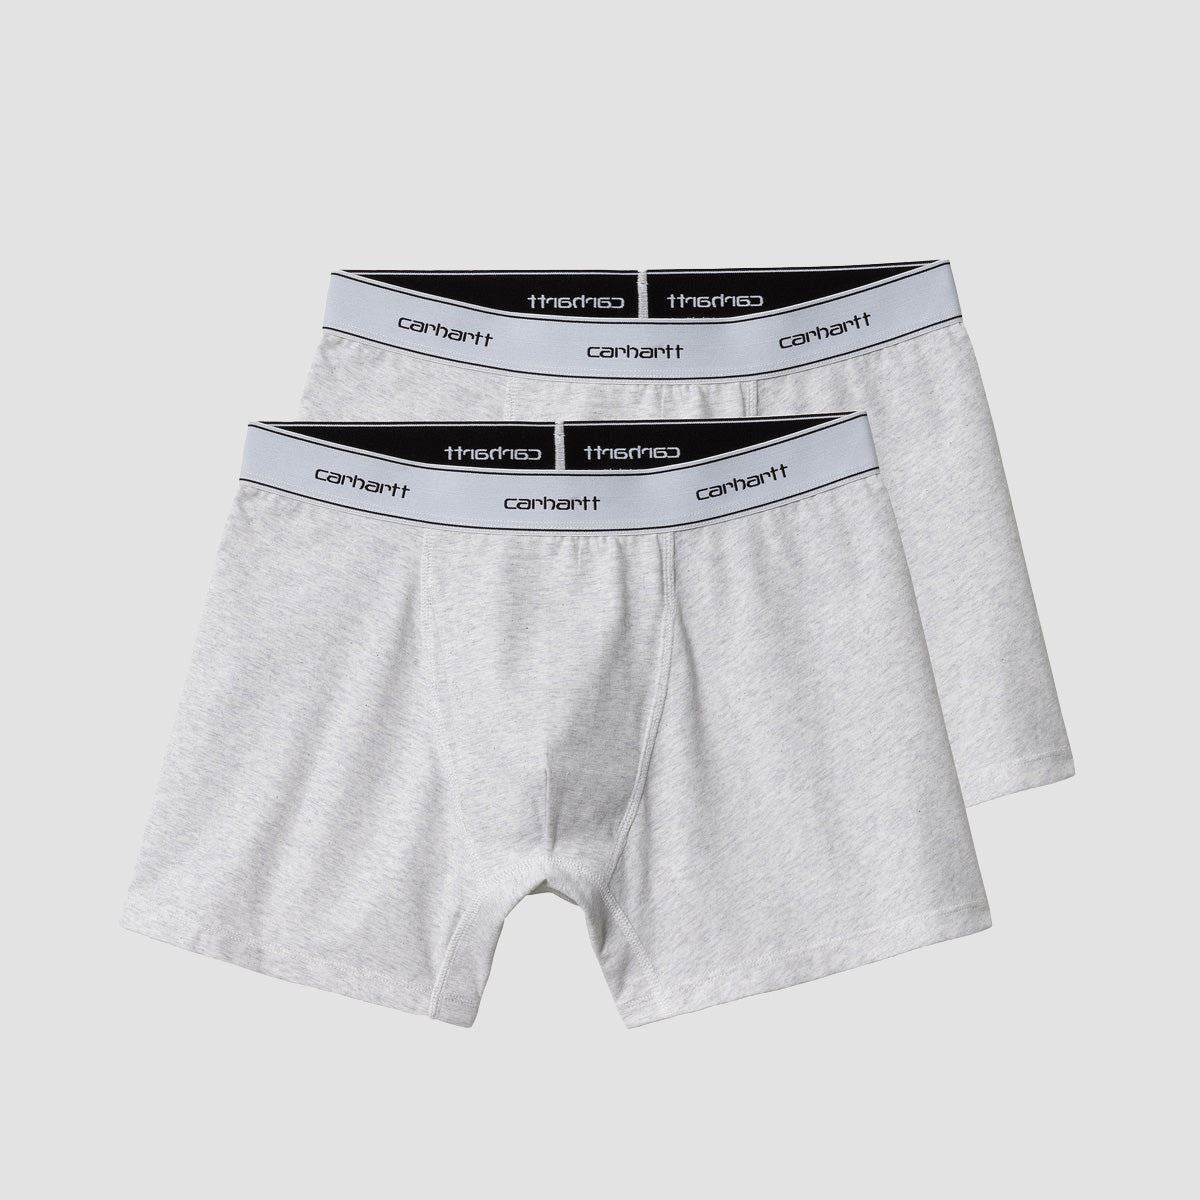 Carhartt WIP Cotton Trunks Boxer Shorts 2 Pack Ash Heather/Ash Heather